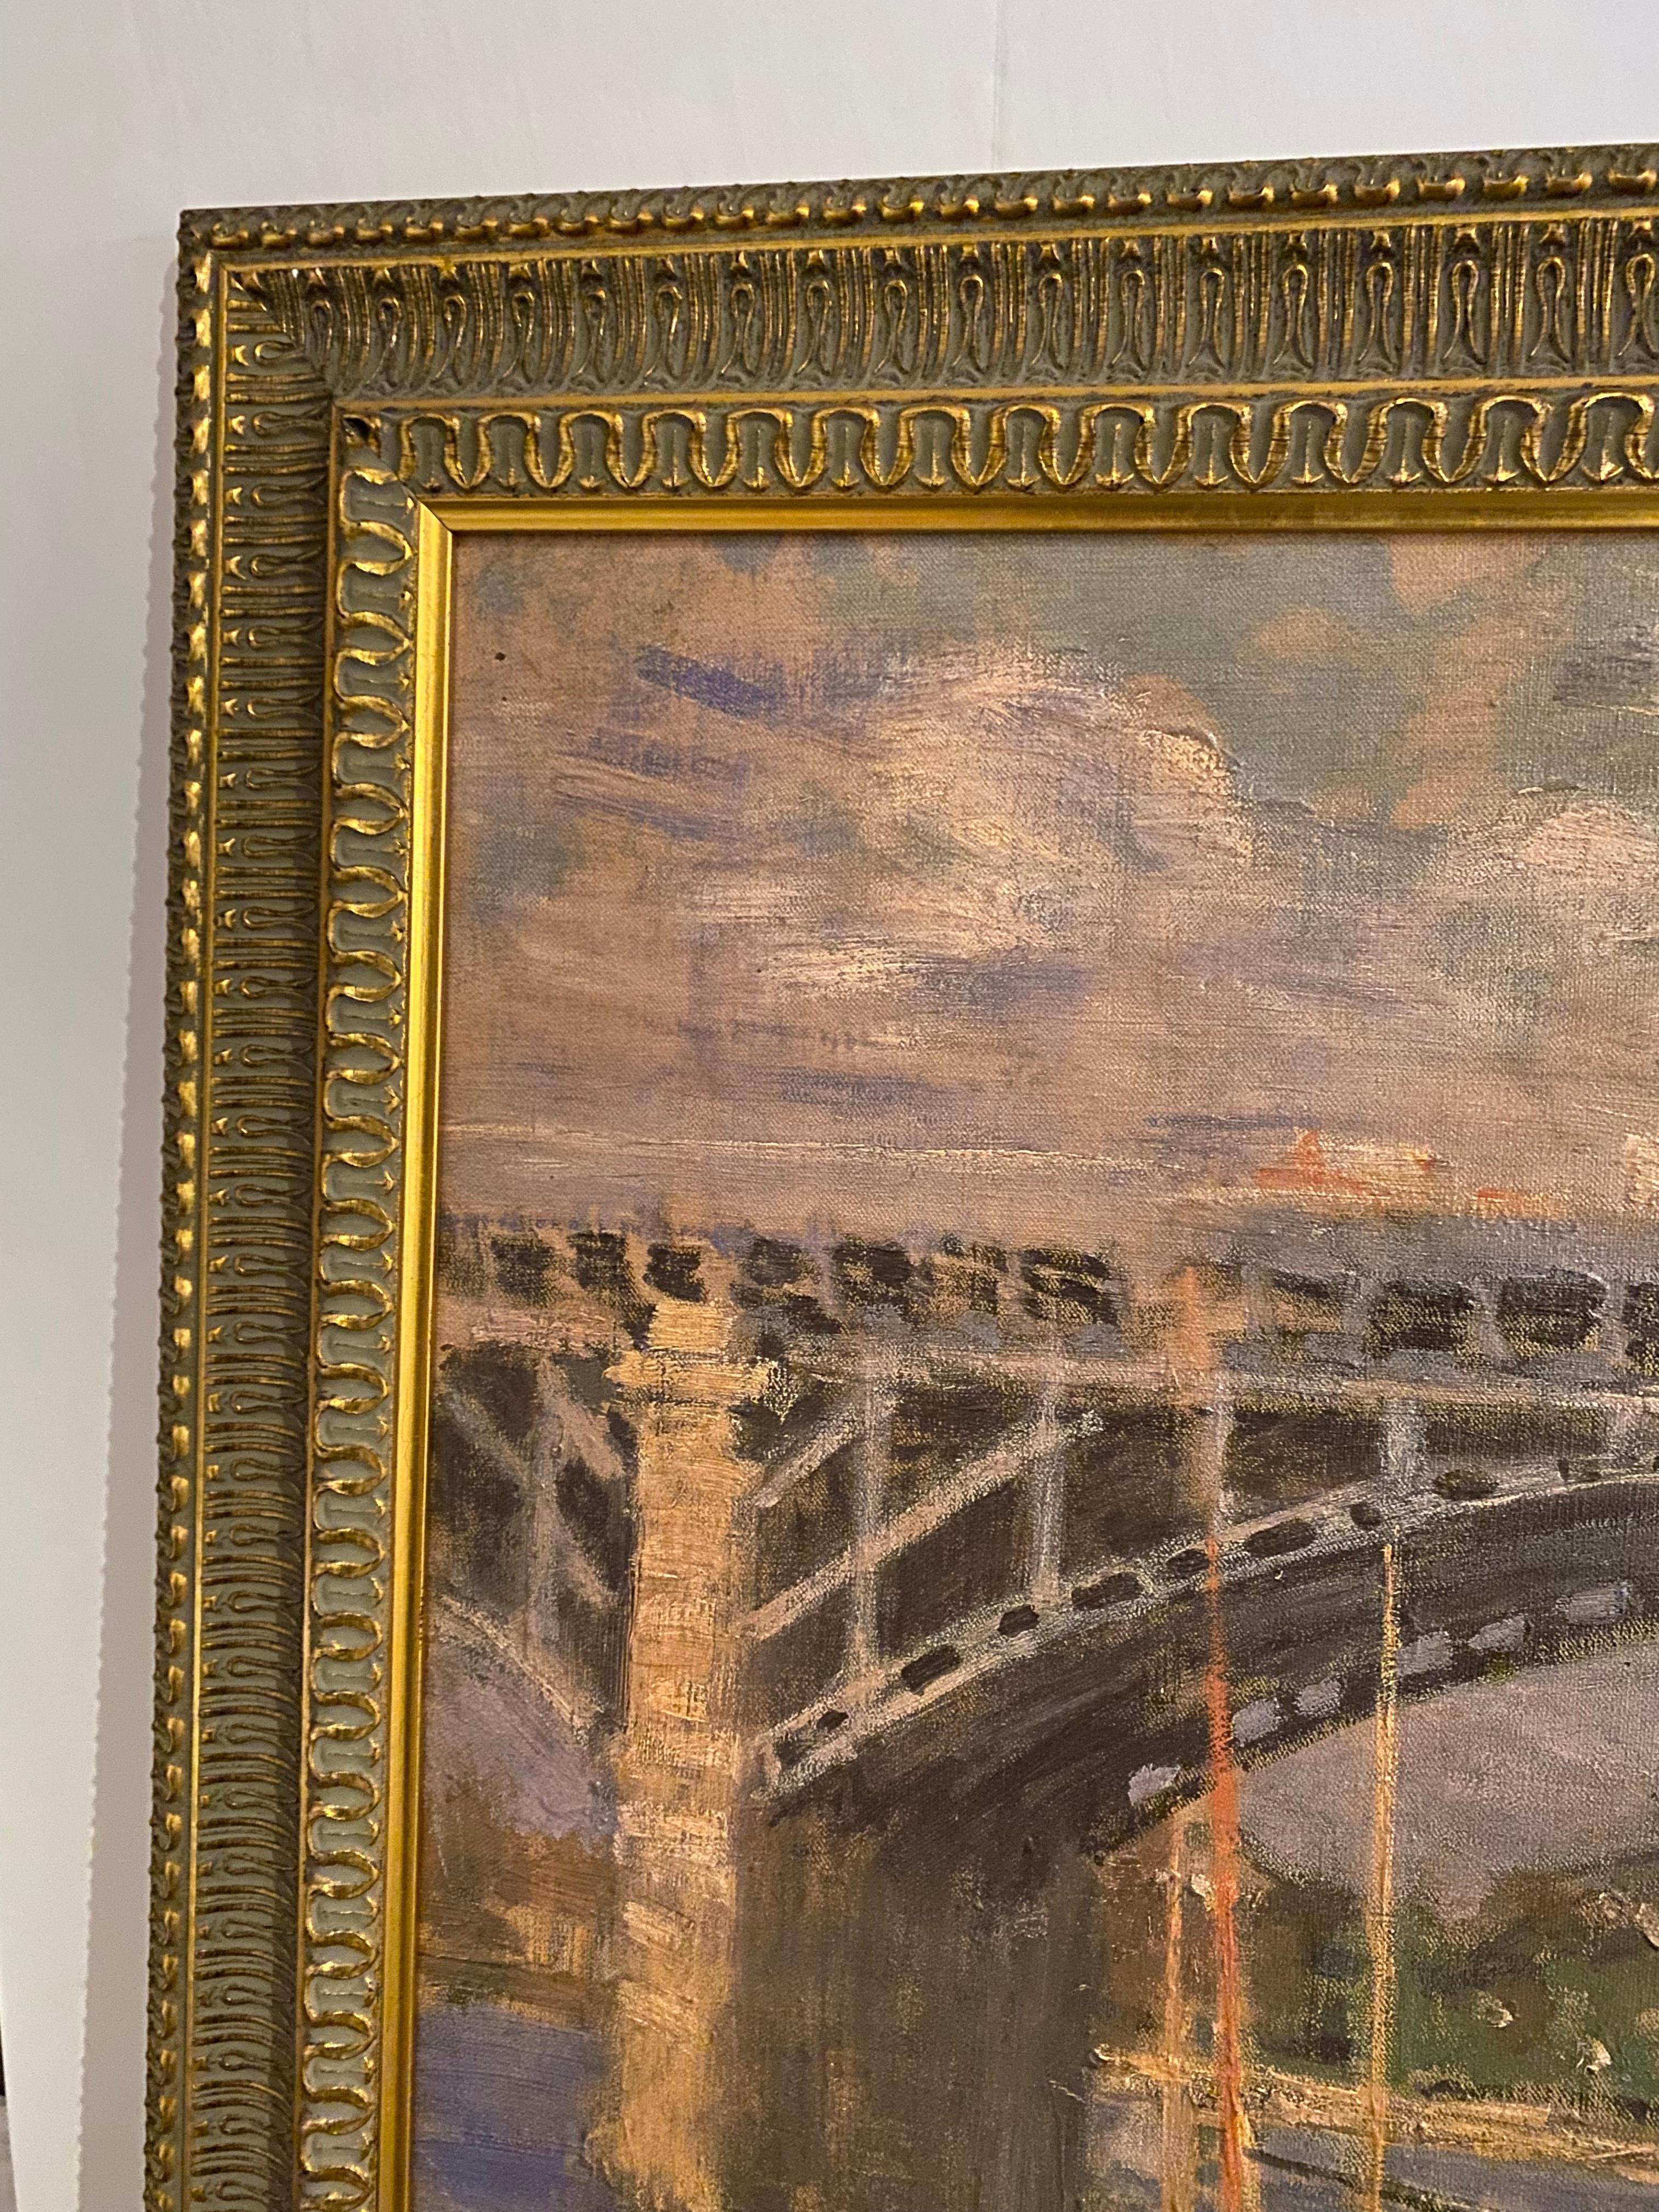 This framed reproduction of Claude Monet's immensely popular painting, “The Bridge Over The Seine Near Argenteuil,” comes with a certificate of authenticity on the back and is numbered 1102, making it interesting for several reasons.

The